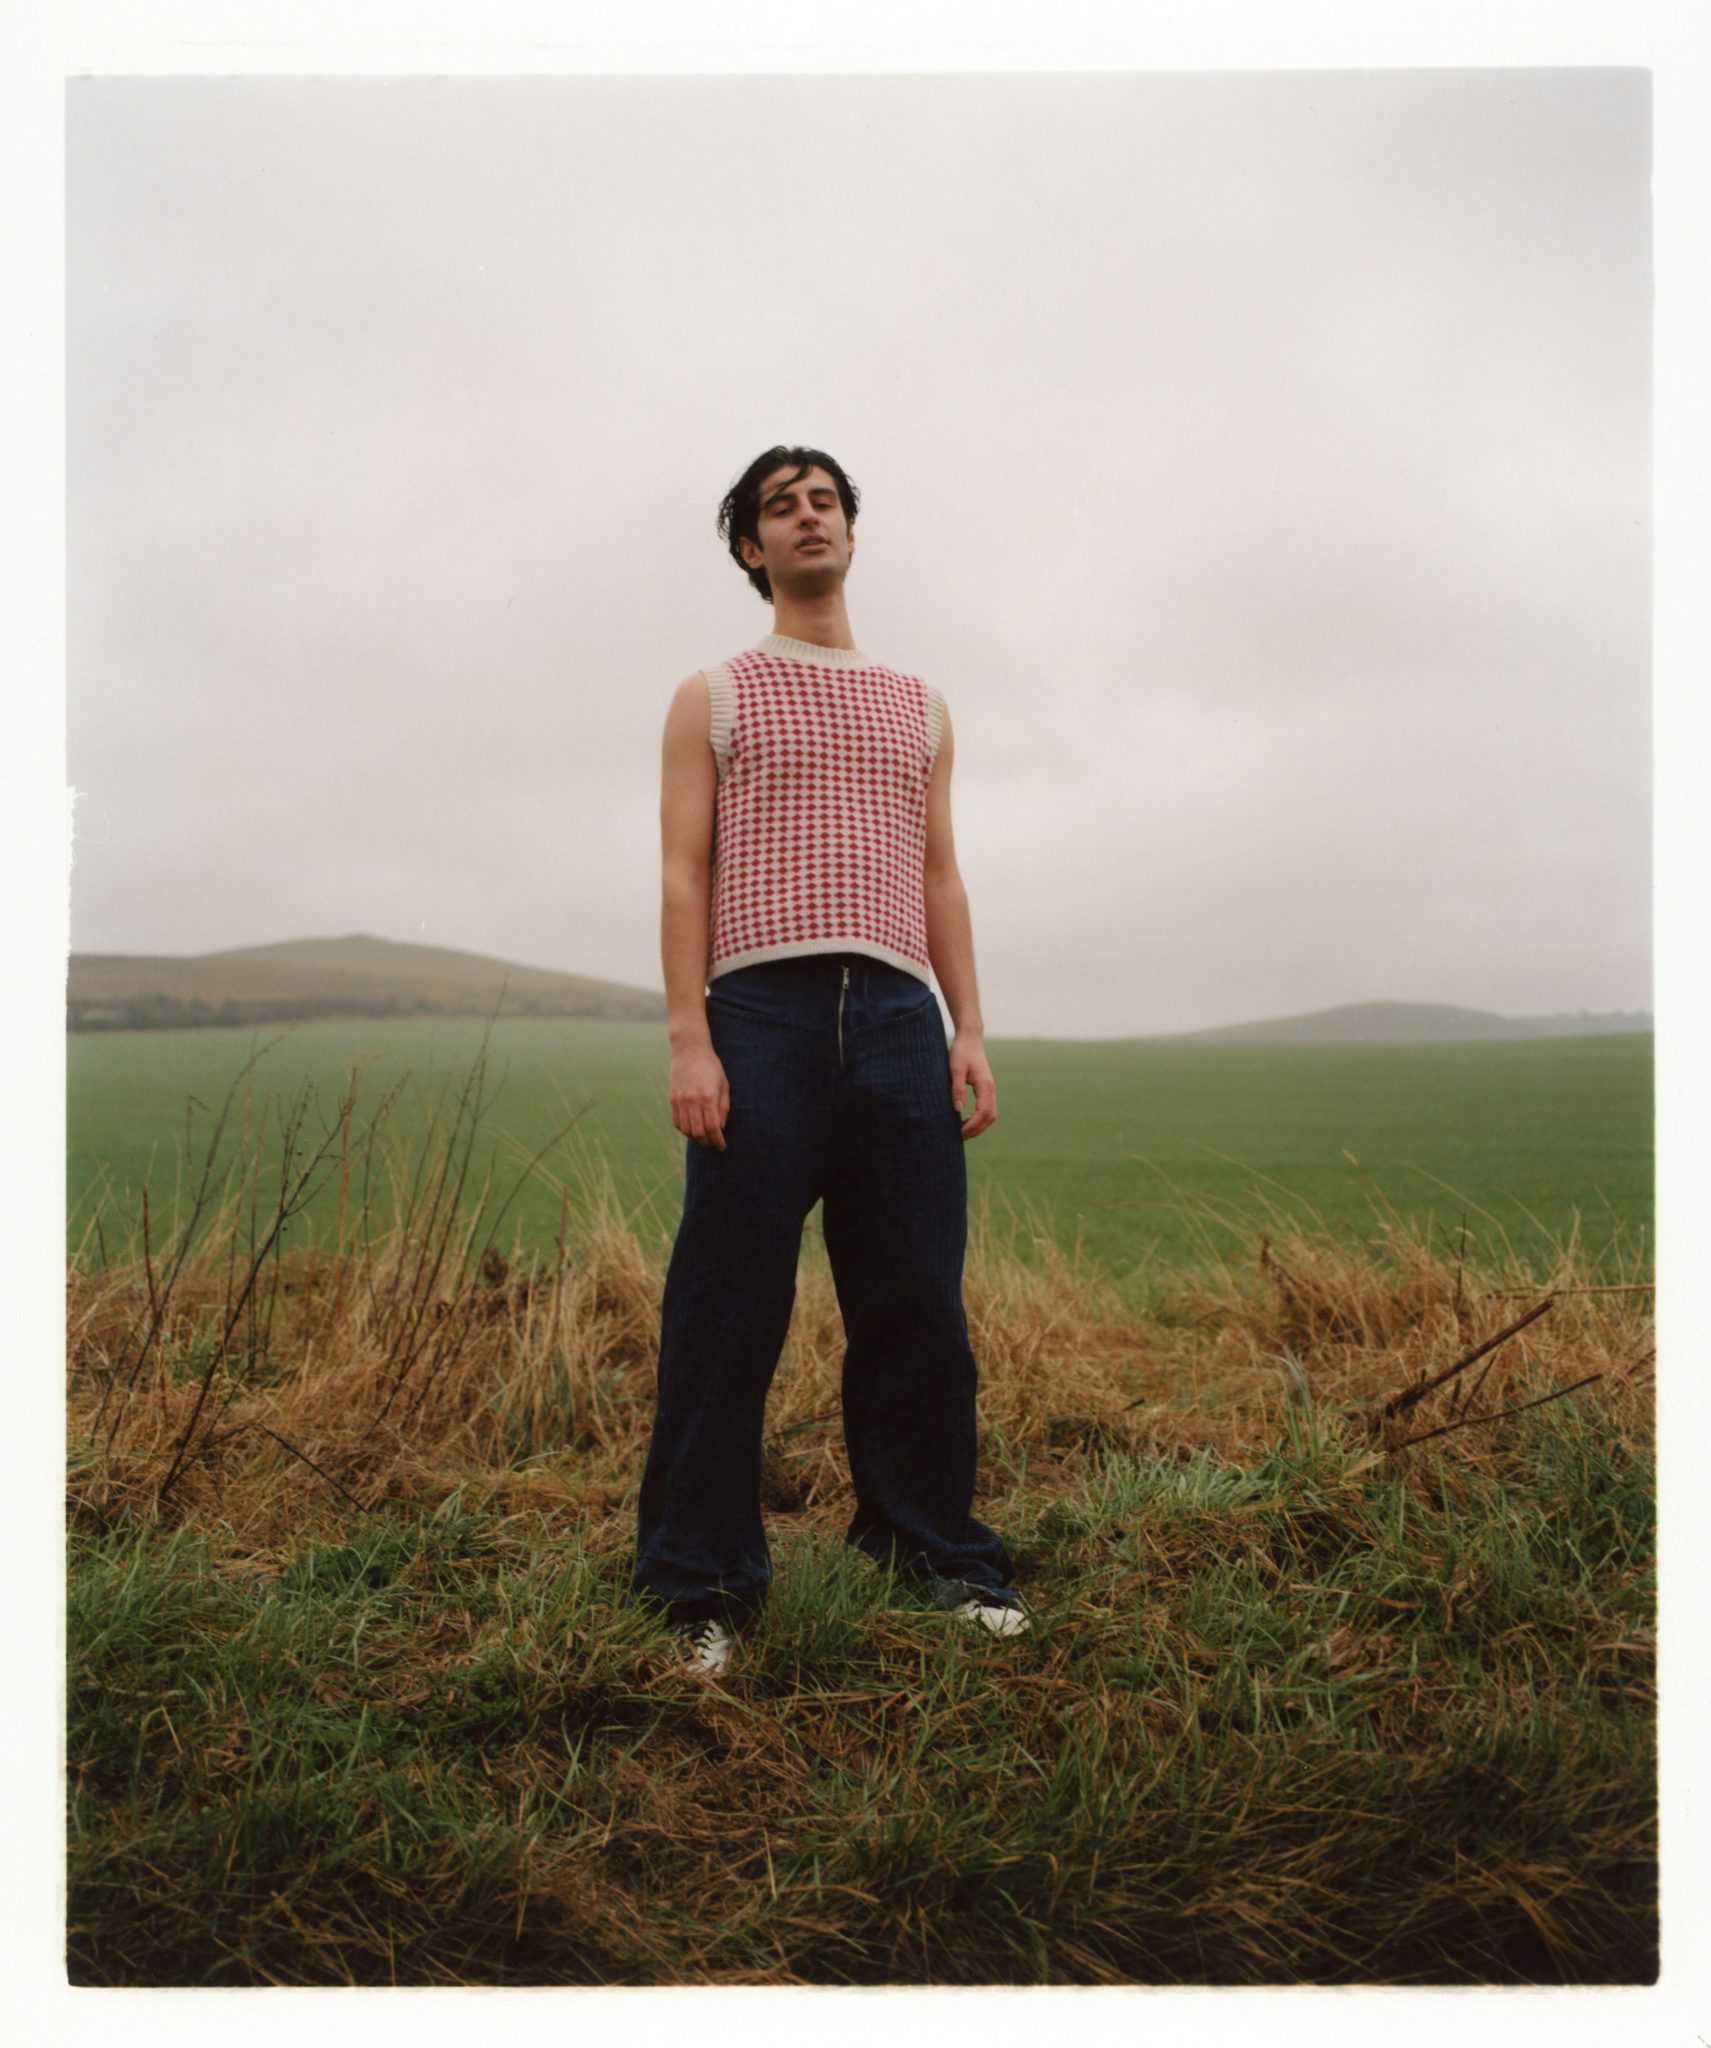 Photograph by Niall Hodson of a person wearing a red and white knitted sweater in a field